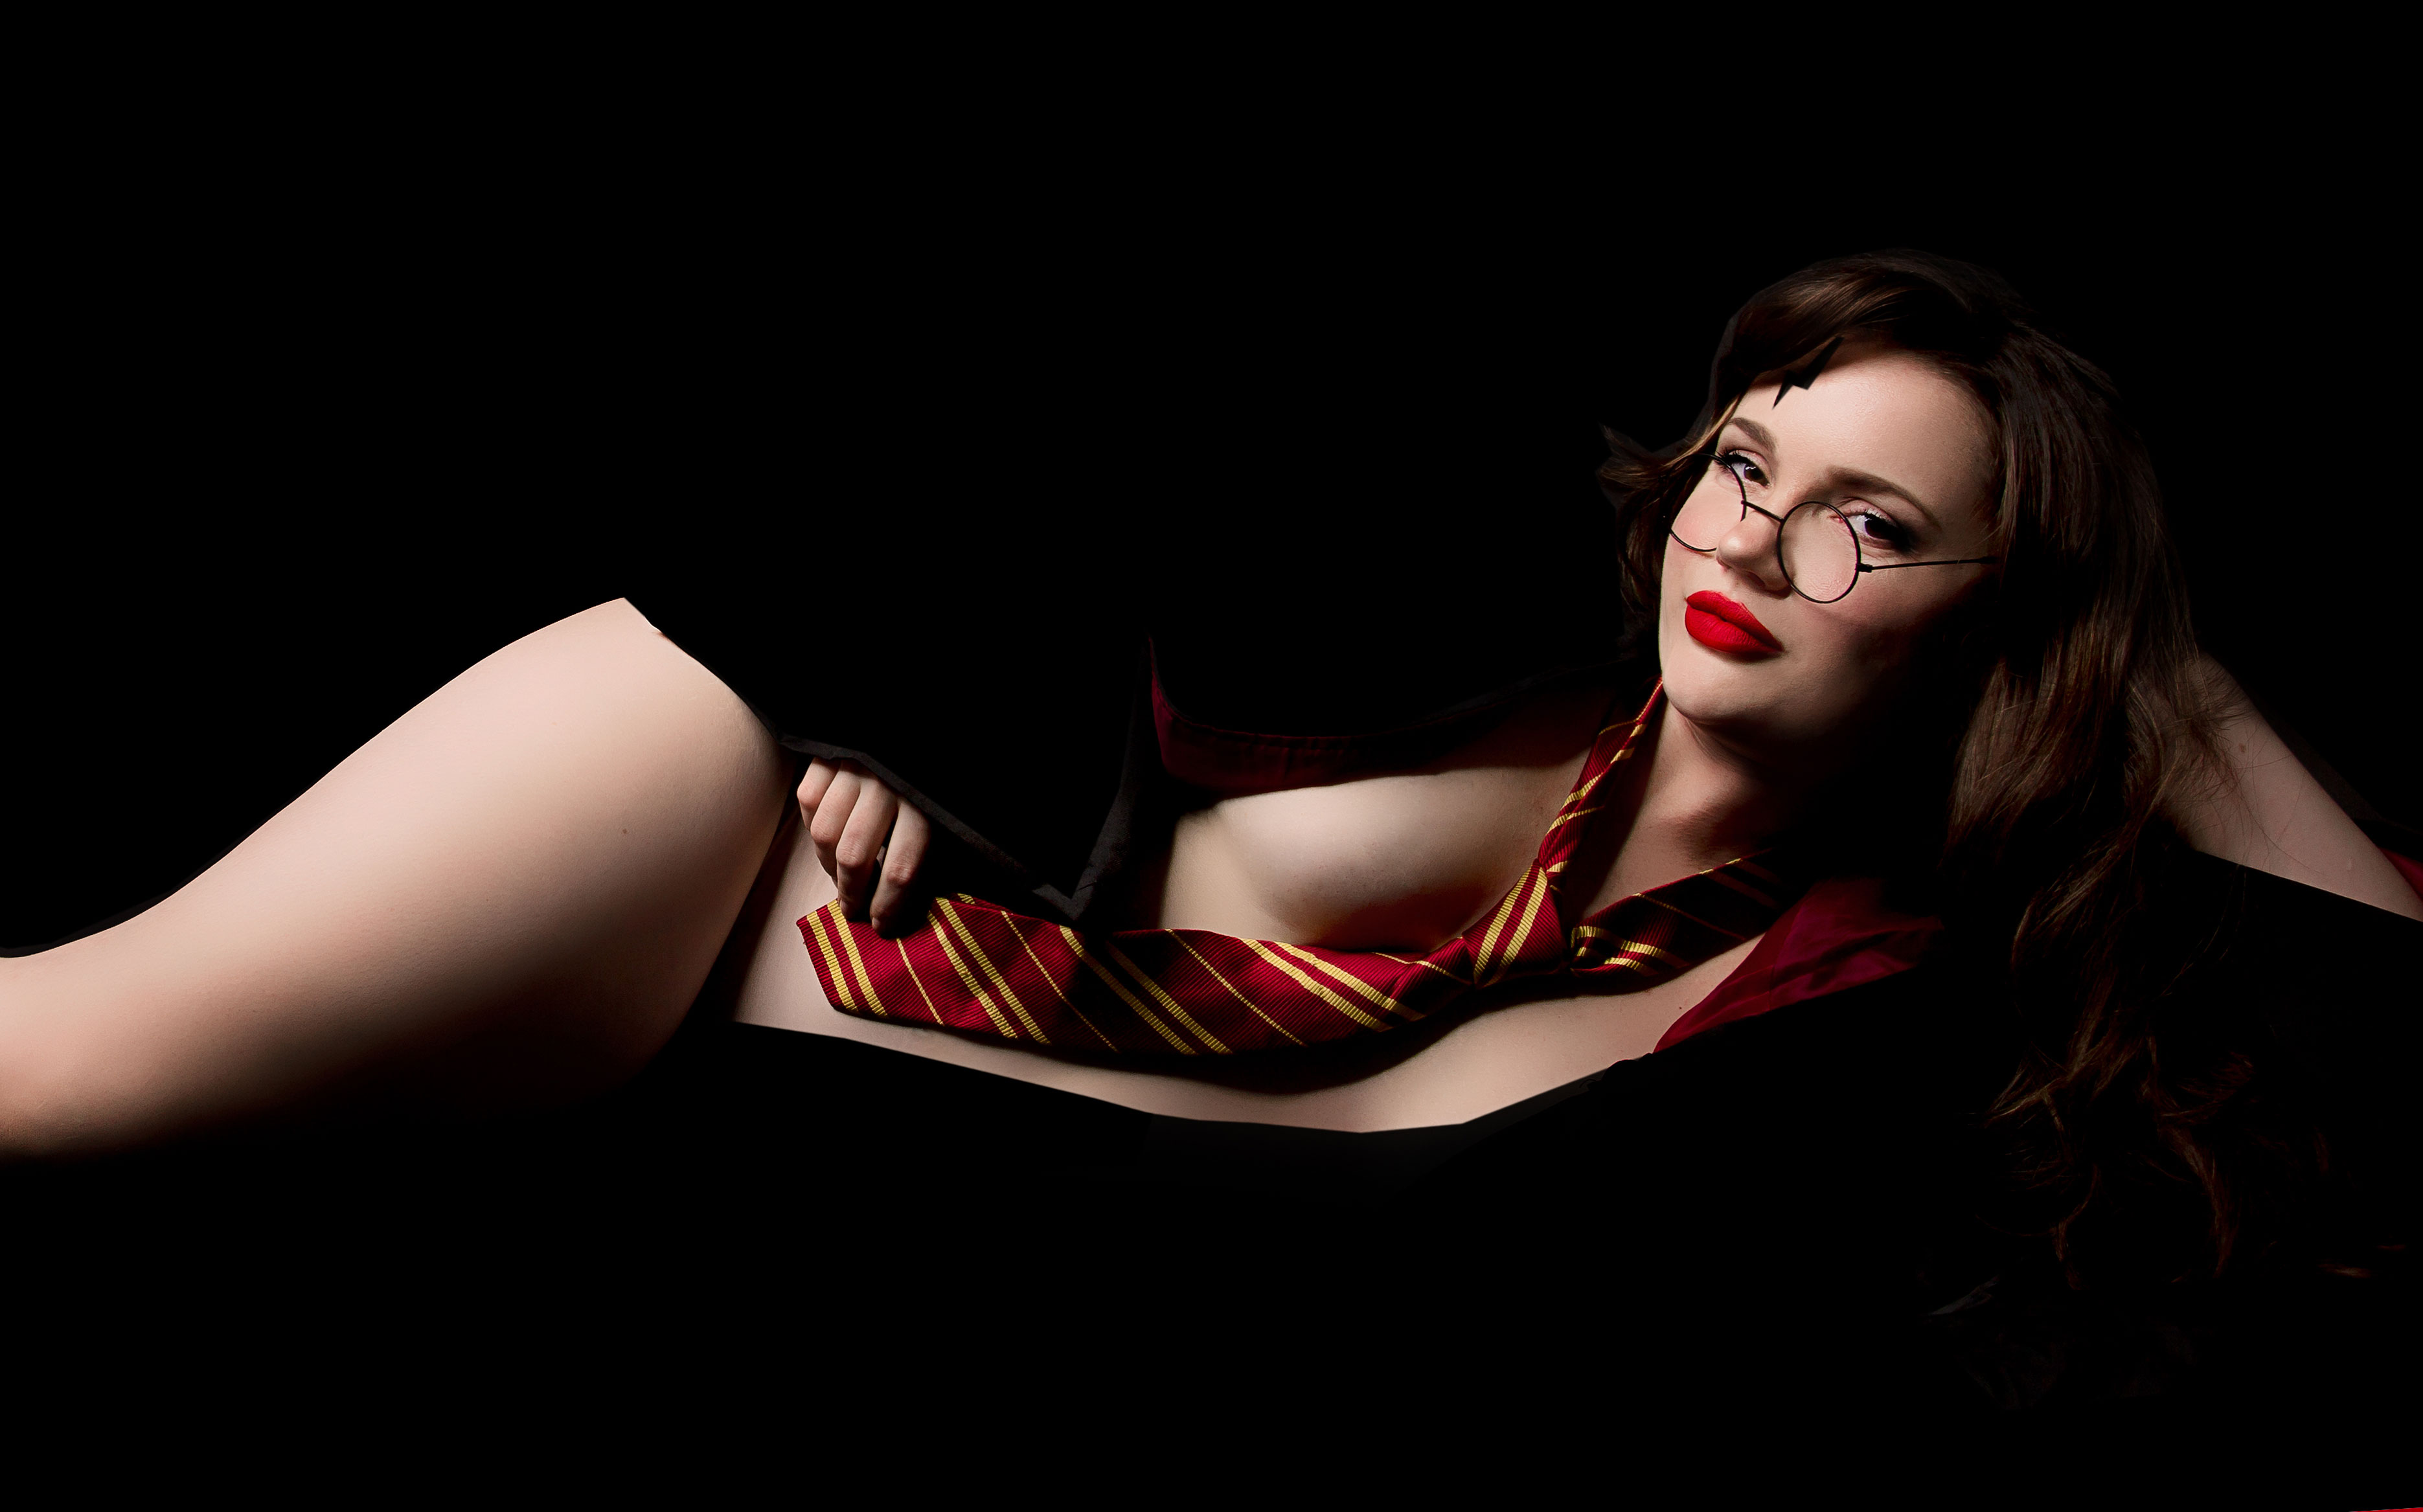 A ‘Harry Potter’ Strip Show Is Coming To Syd This W/E So Keep Your Wands In Your Pants